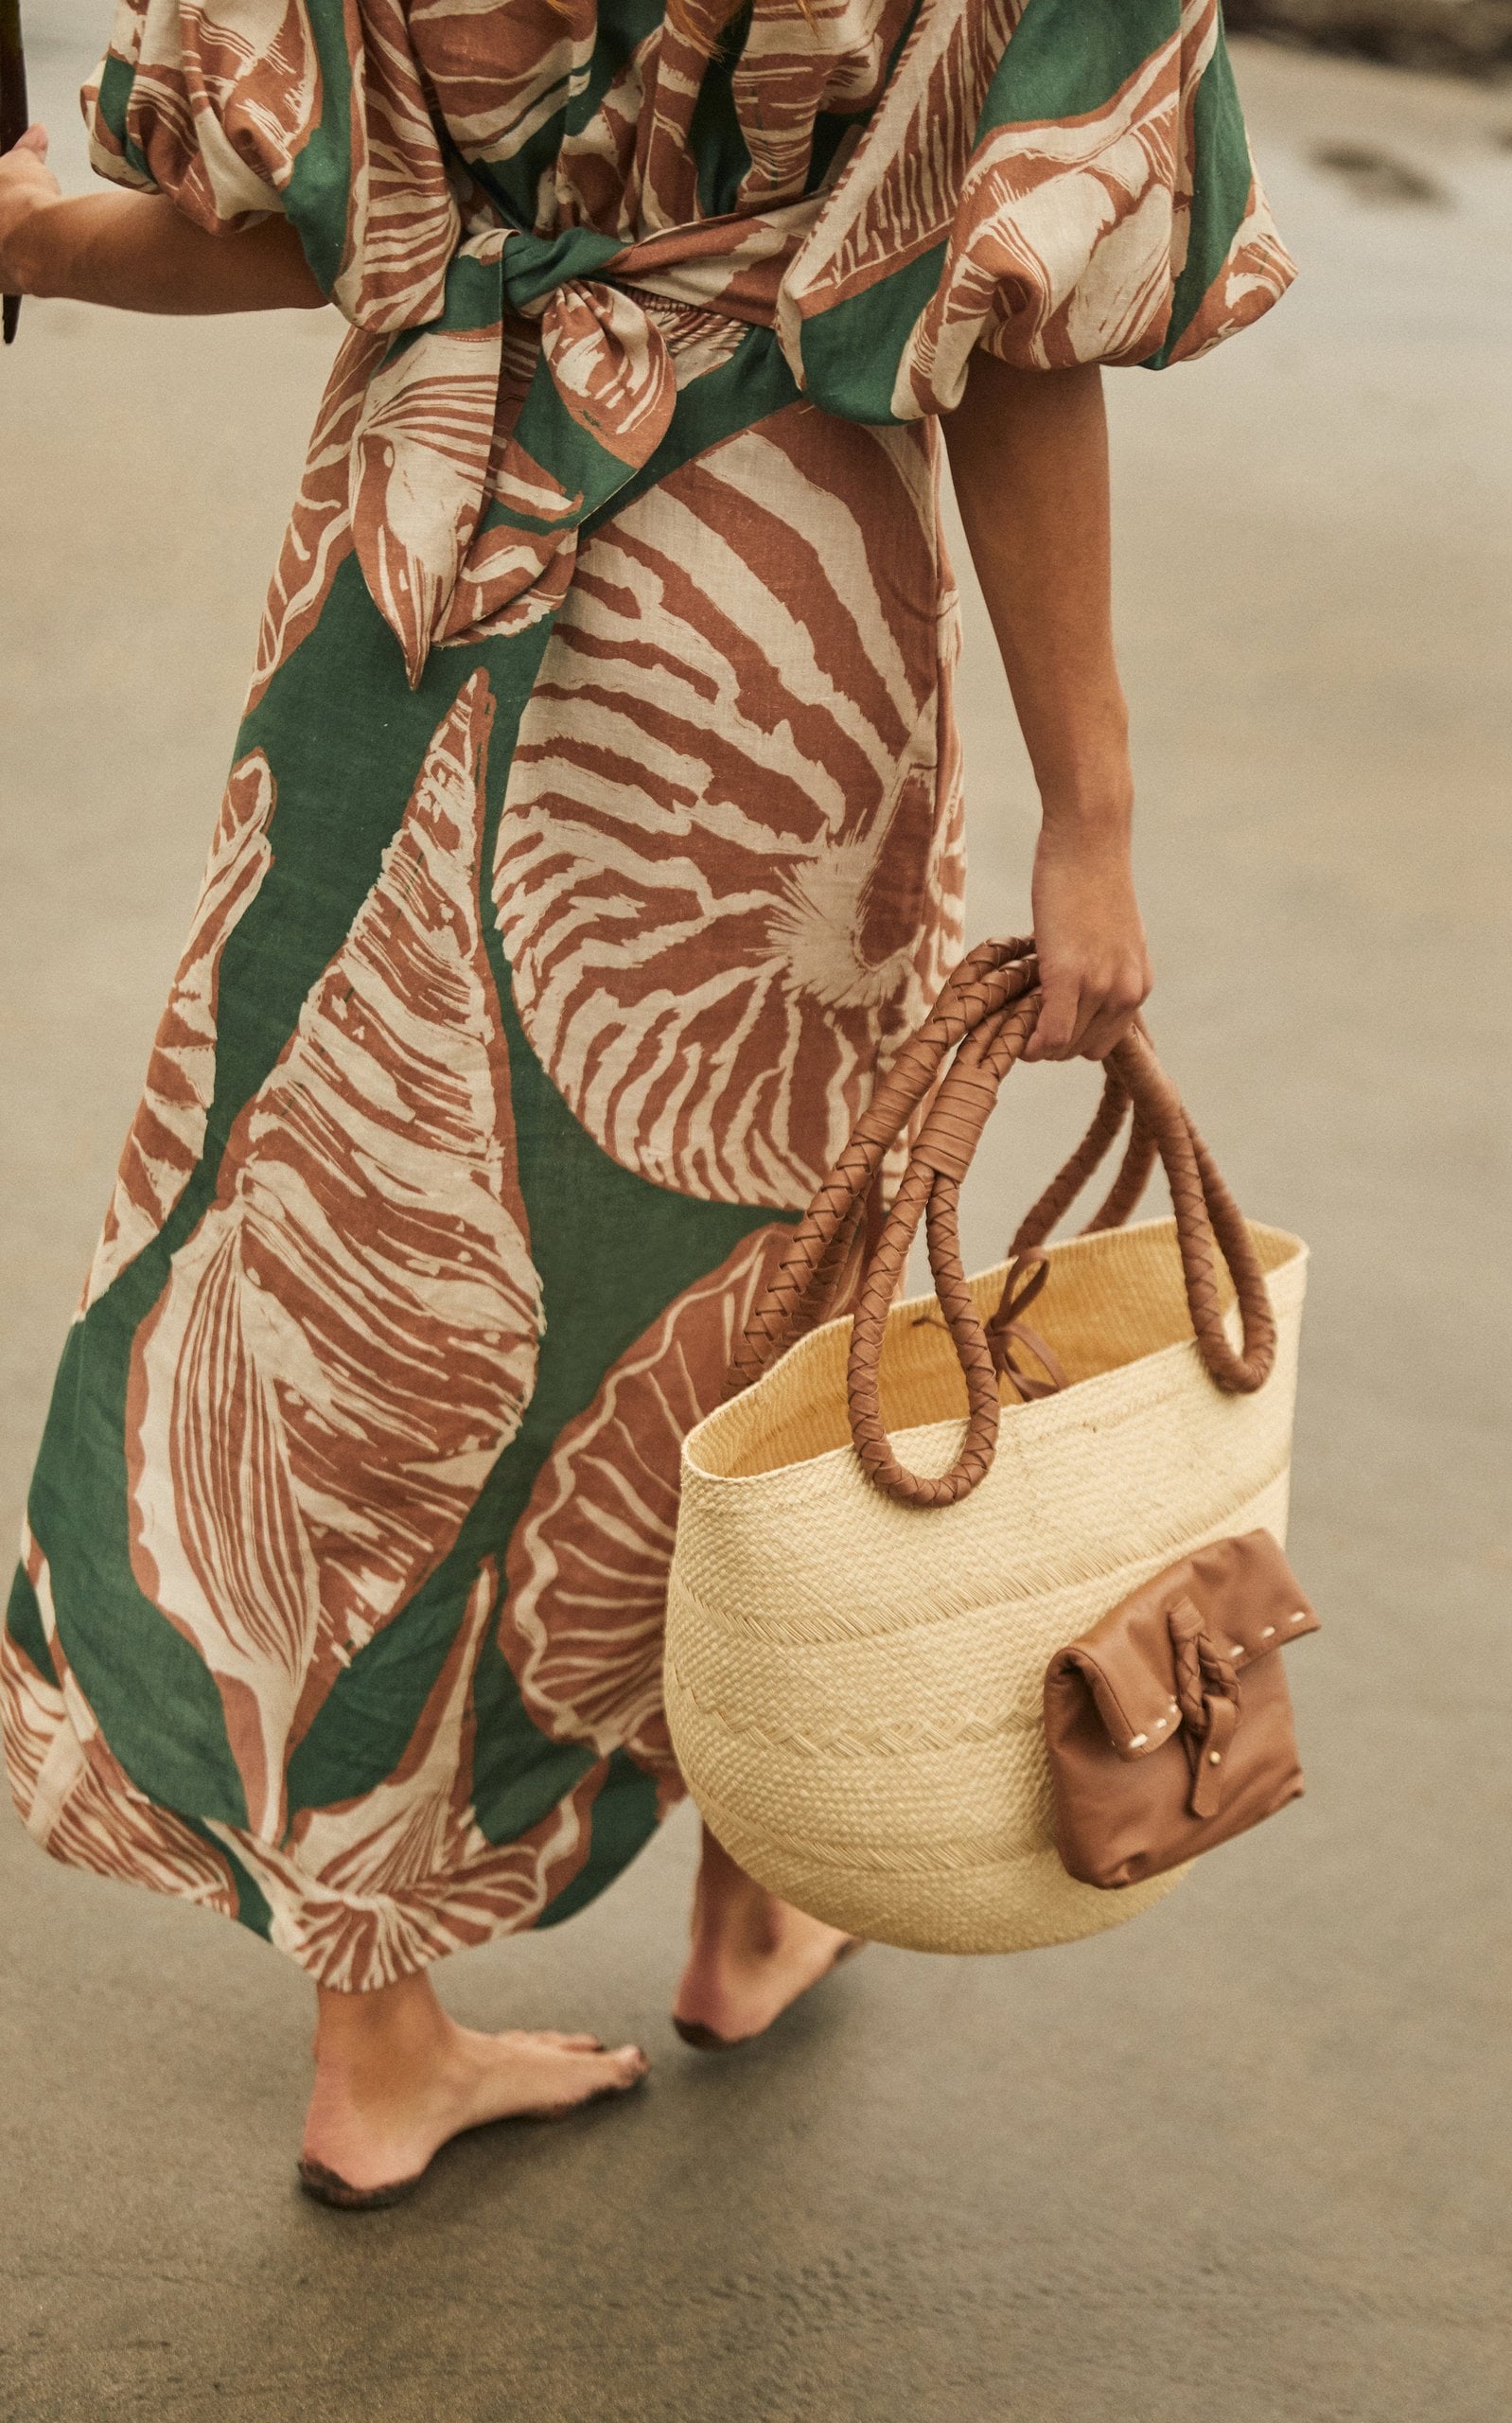 21 Best Beach Bags for Your 2023 Vacations